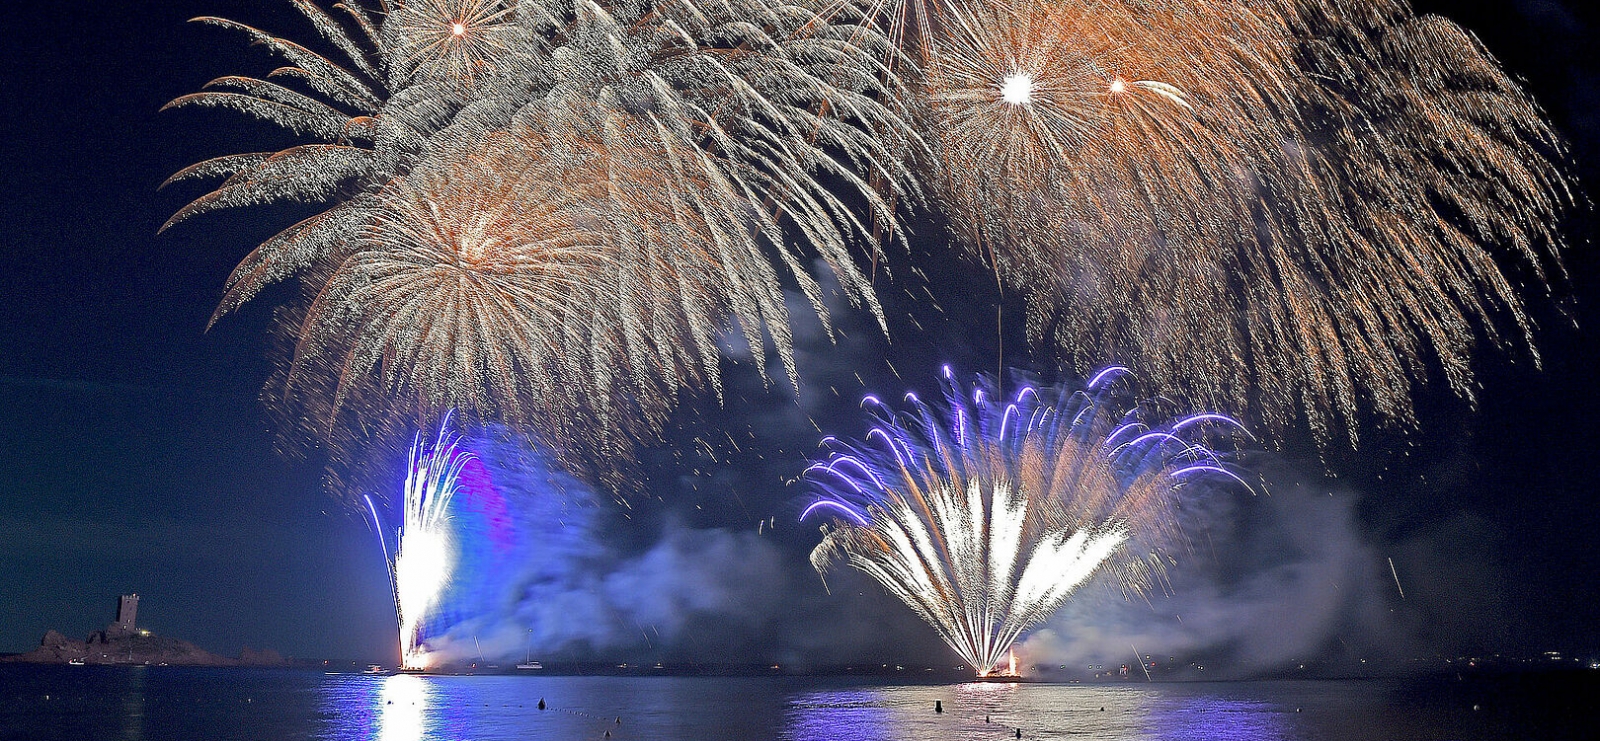 Fireworks on 15th July